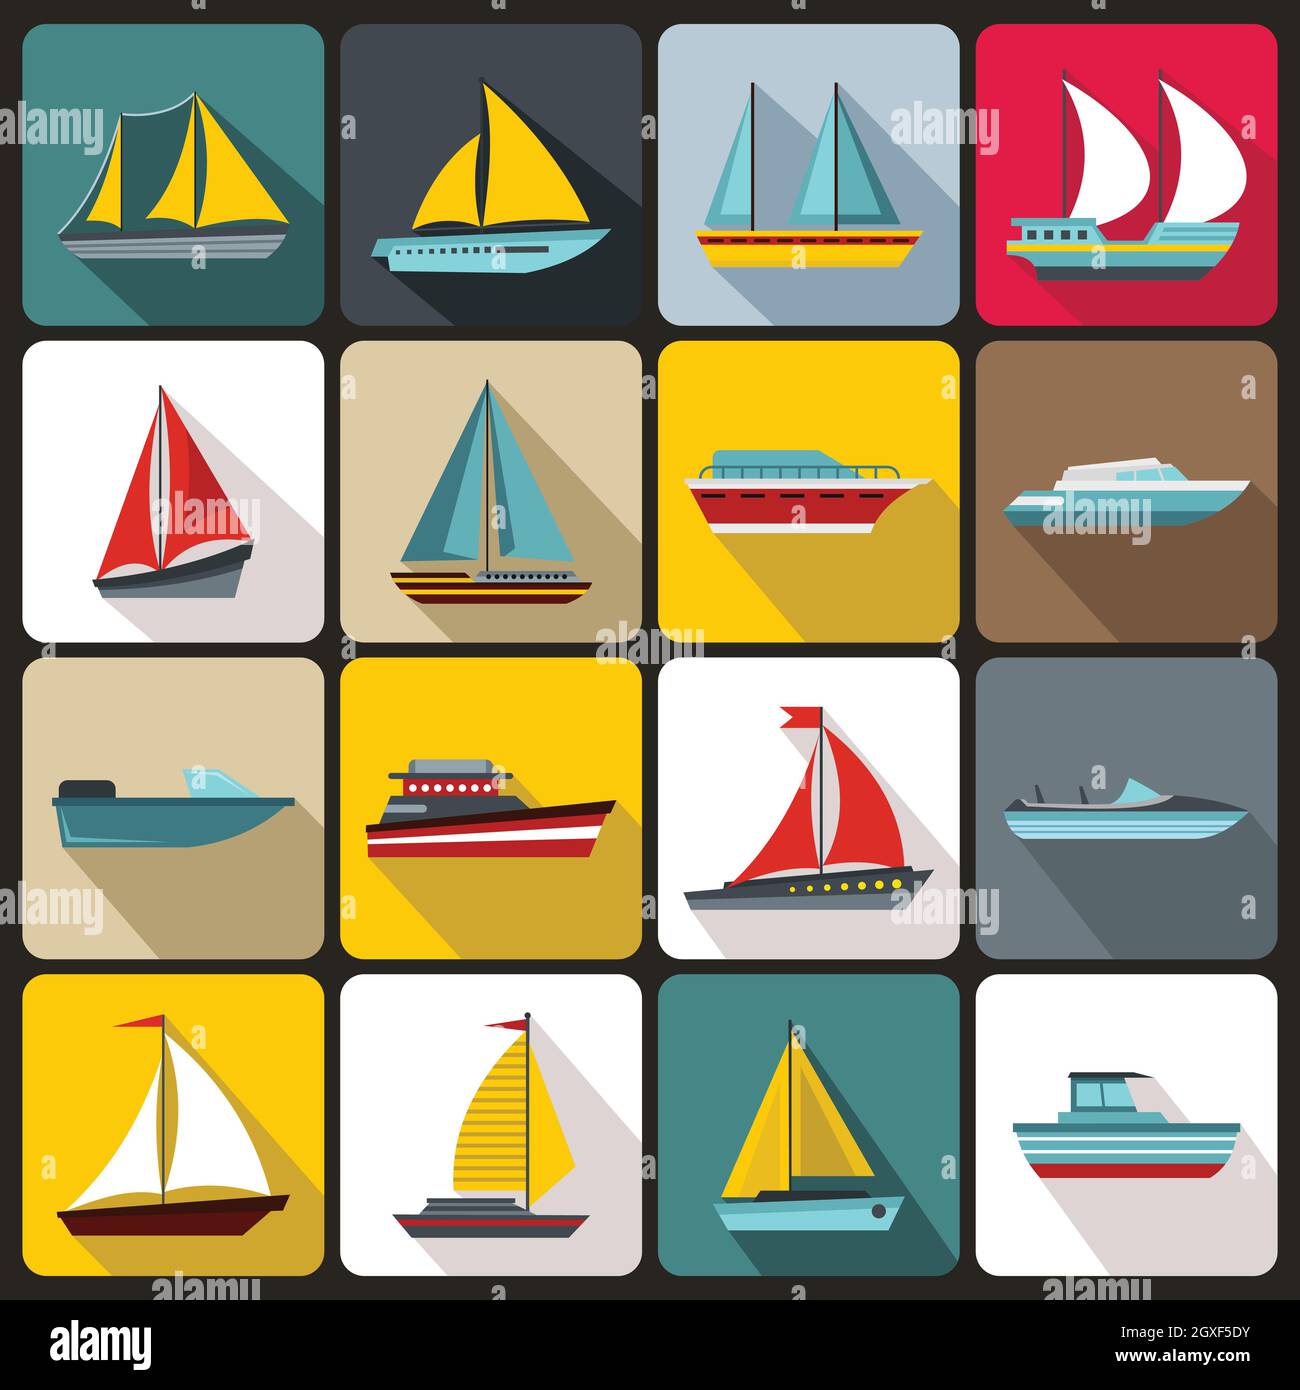 Boat and ship icons set in flat style for any design Stock Photo